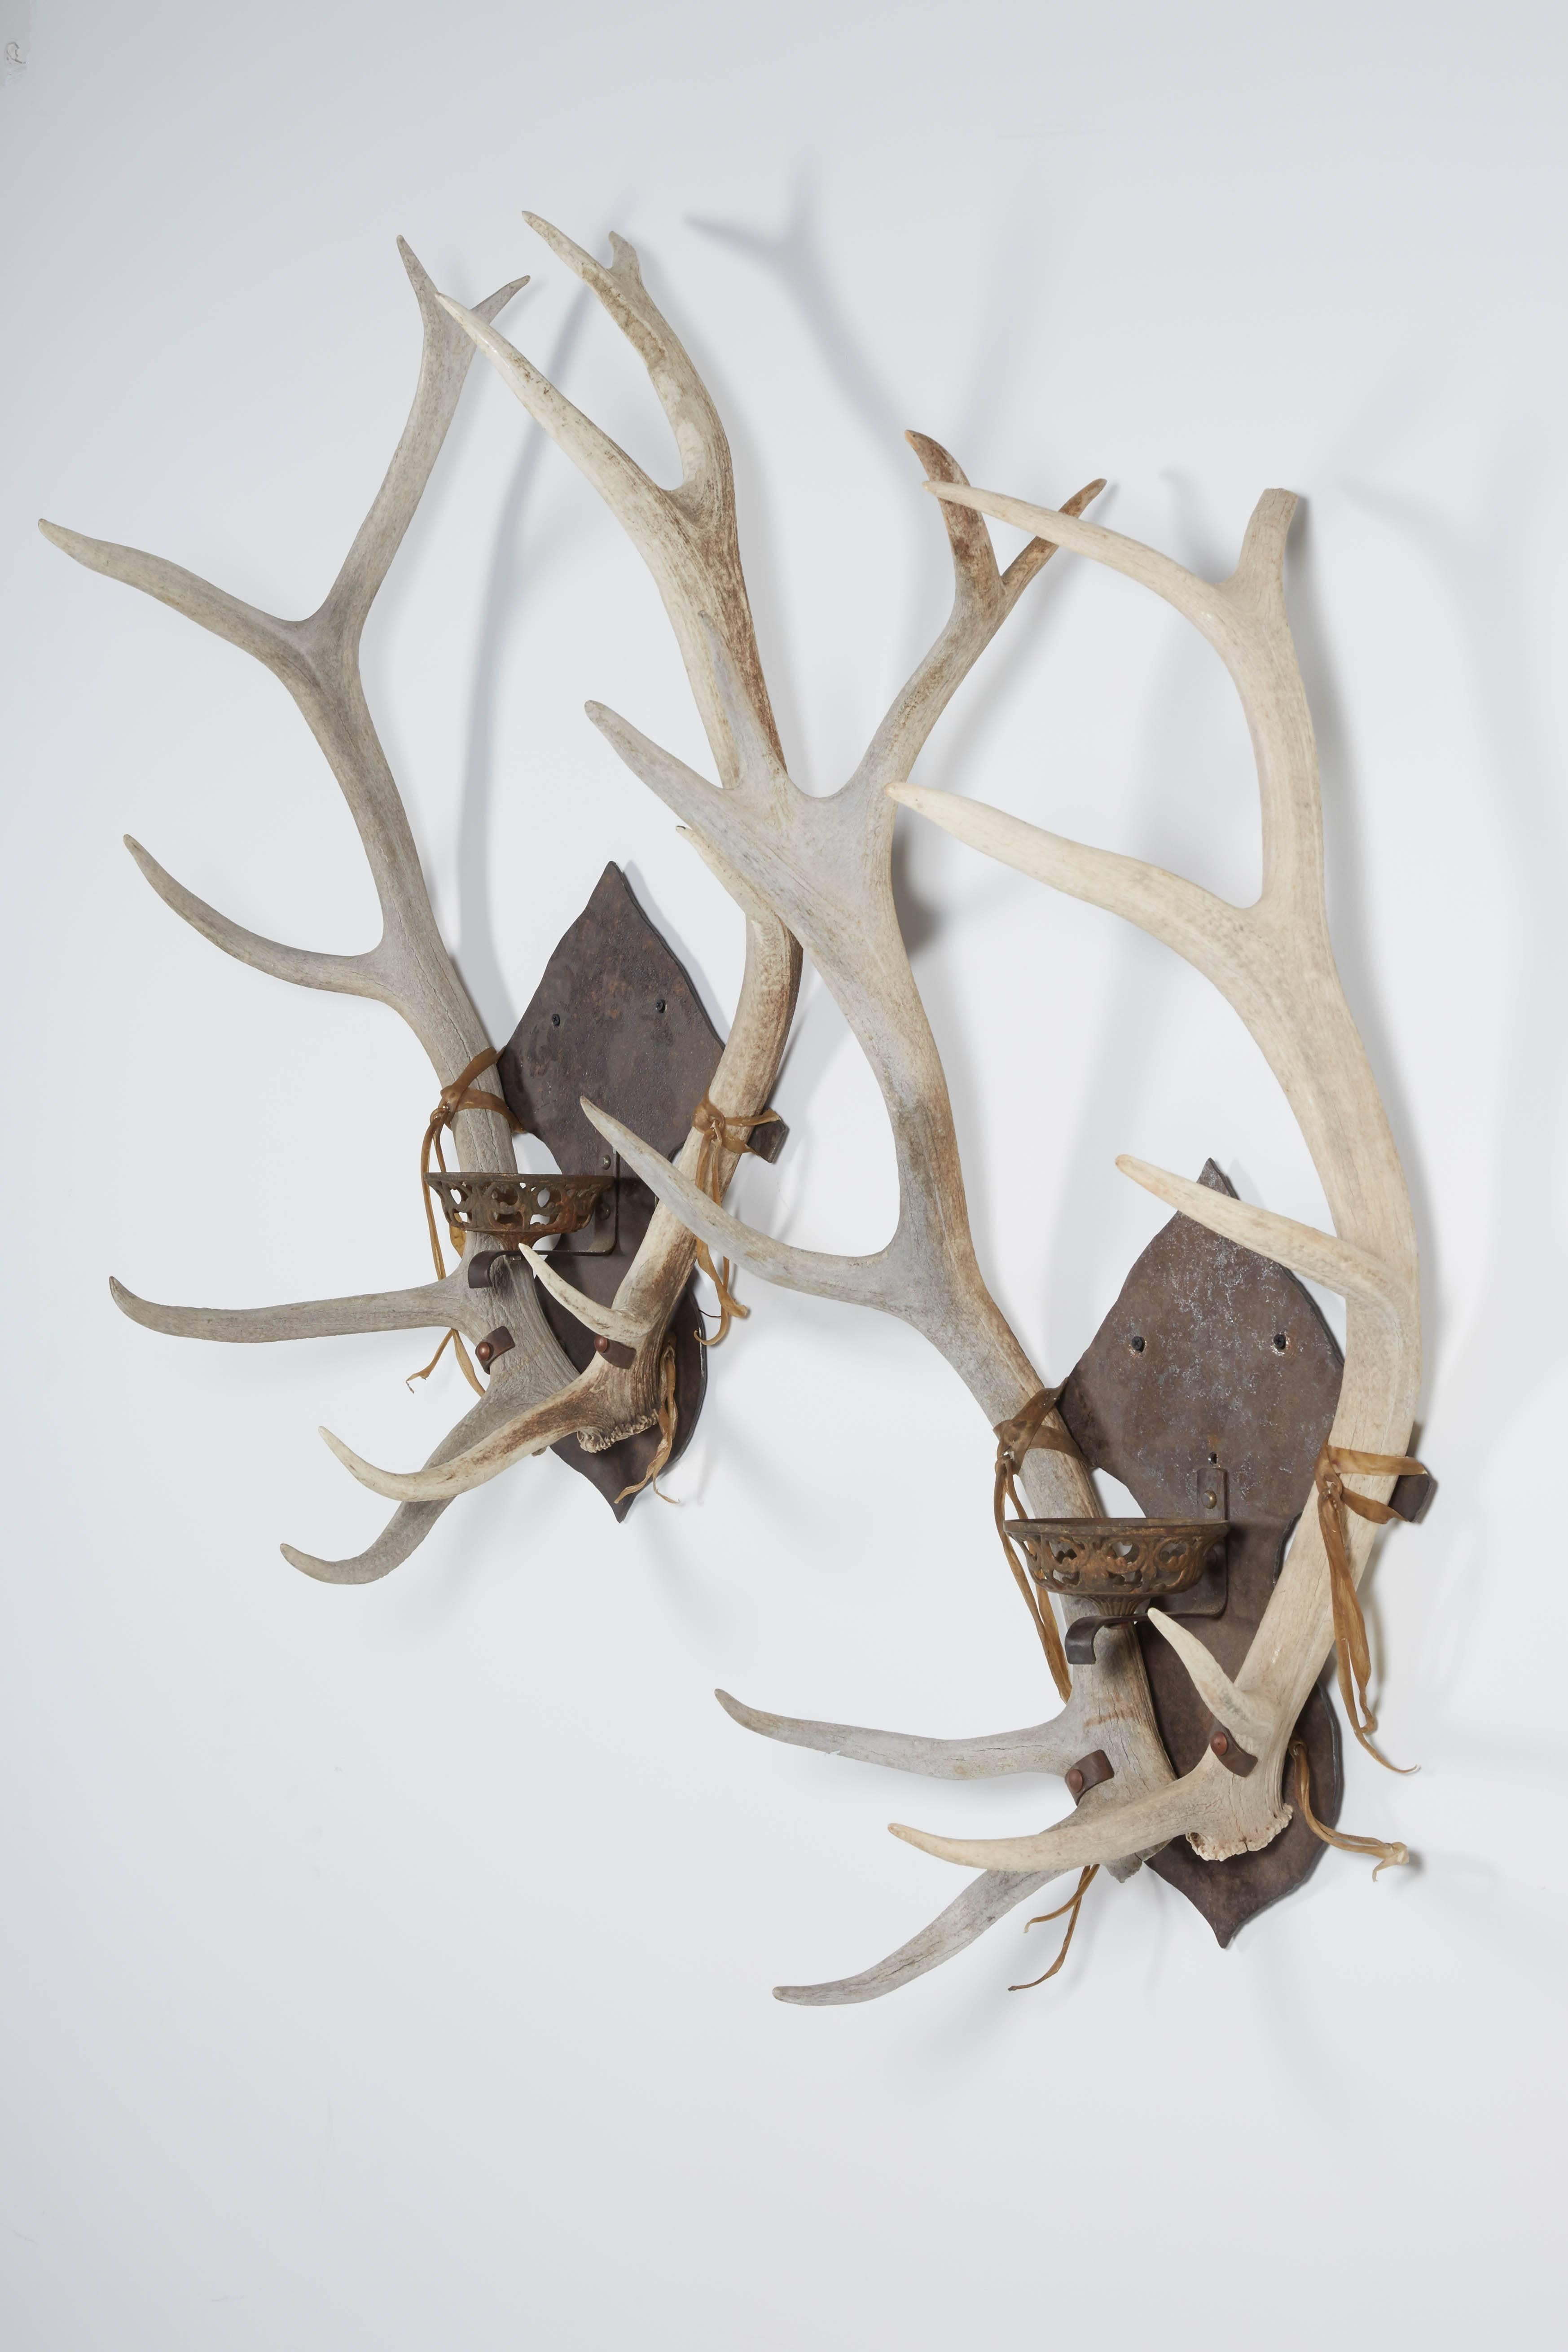 Pair of antler sconces for a candle. These are tied to the frame with rawhide and mount flush to the wall. Excellent condition with minimal breakage of the antler tips.

Not available for sale or to ship in the state of California.